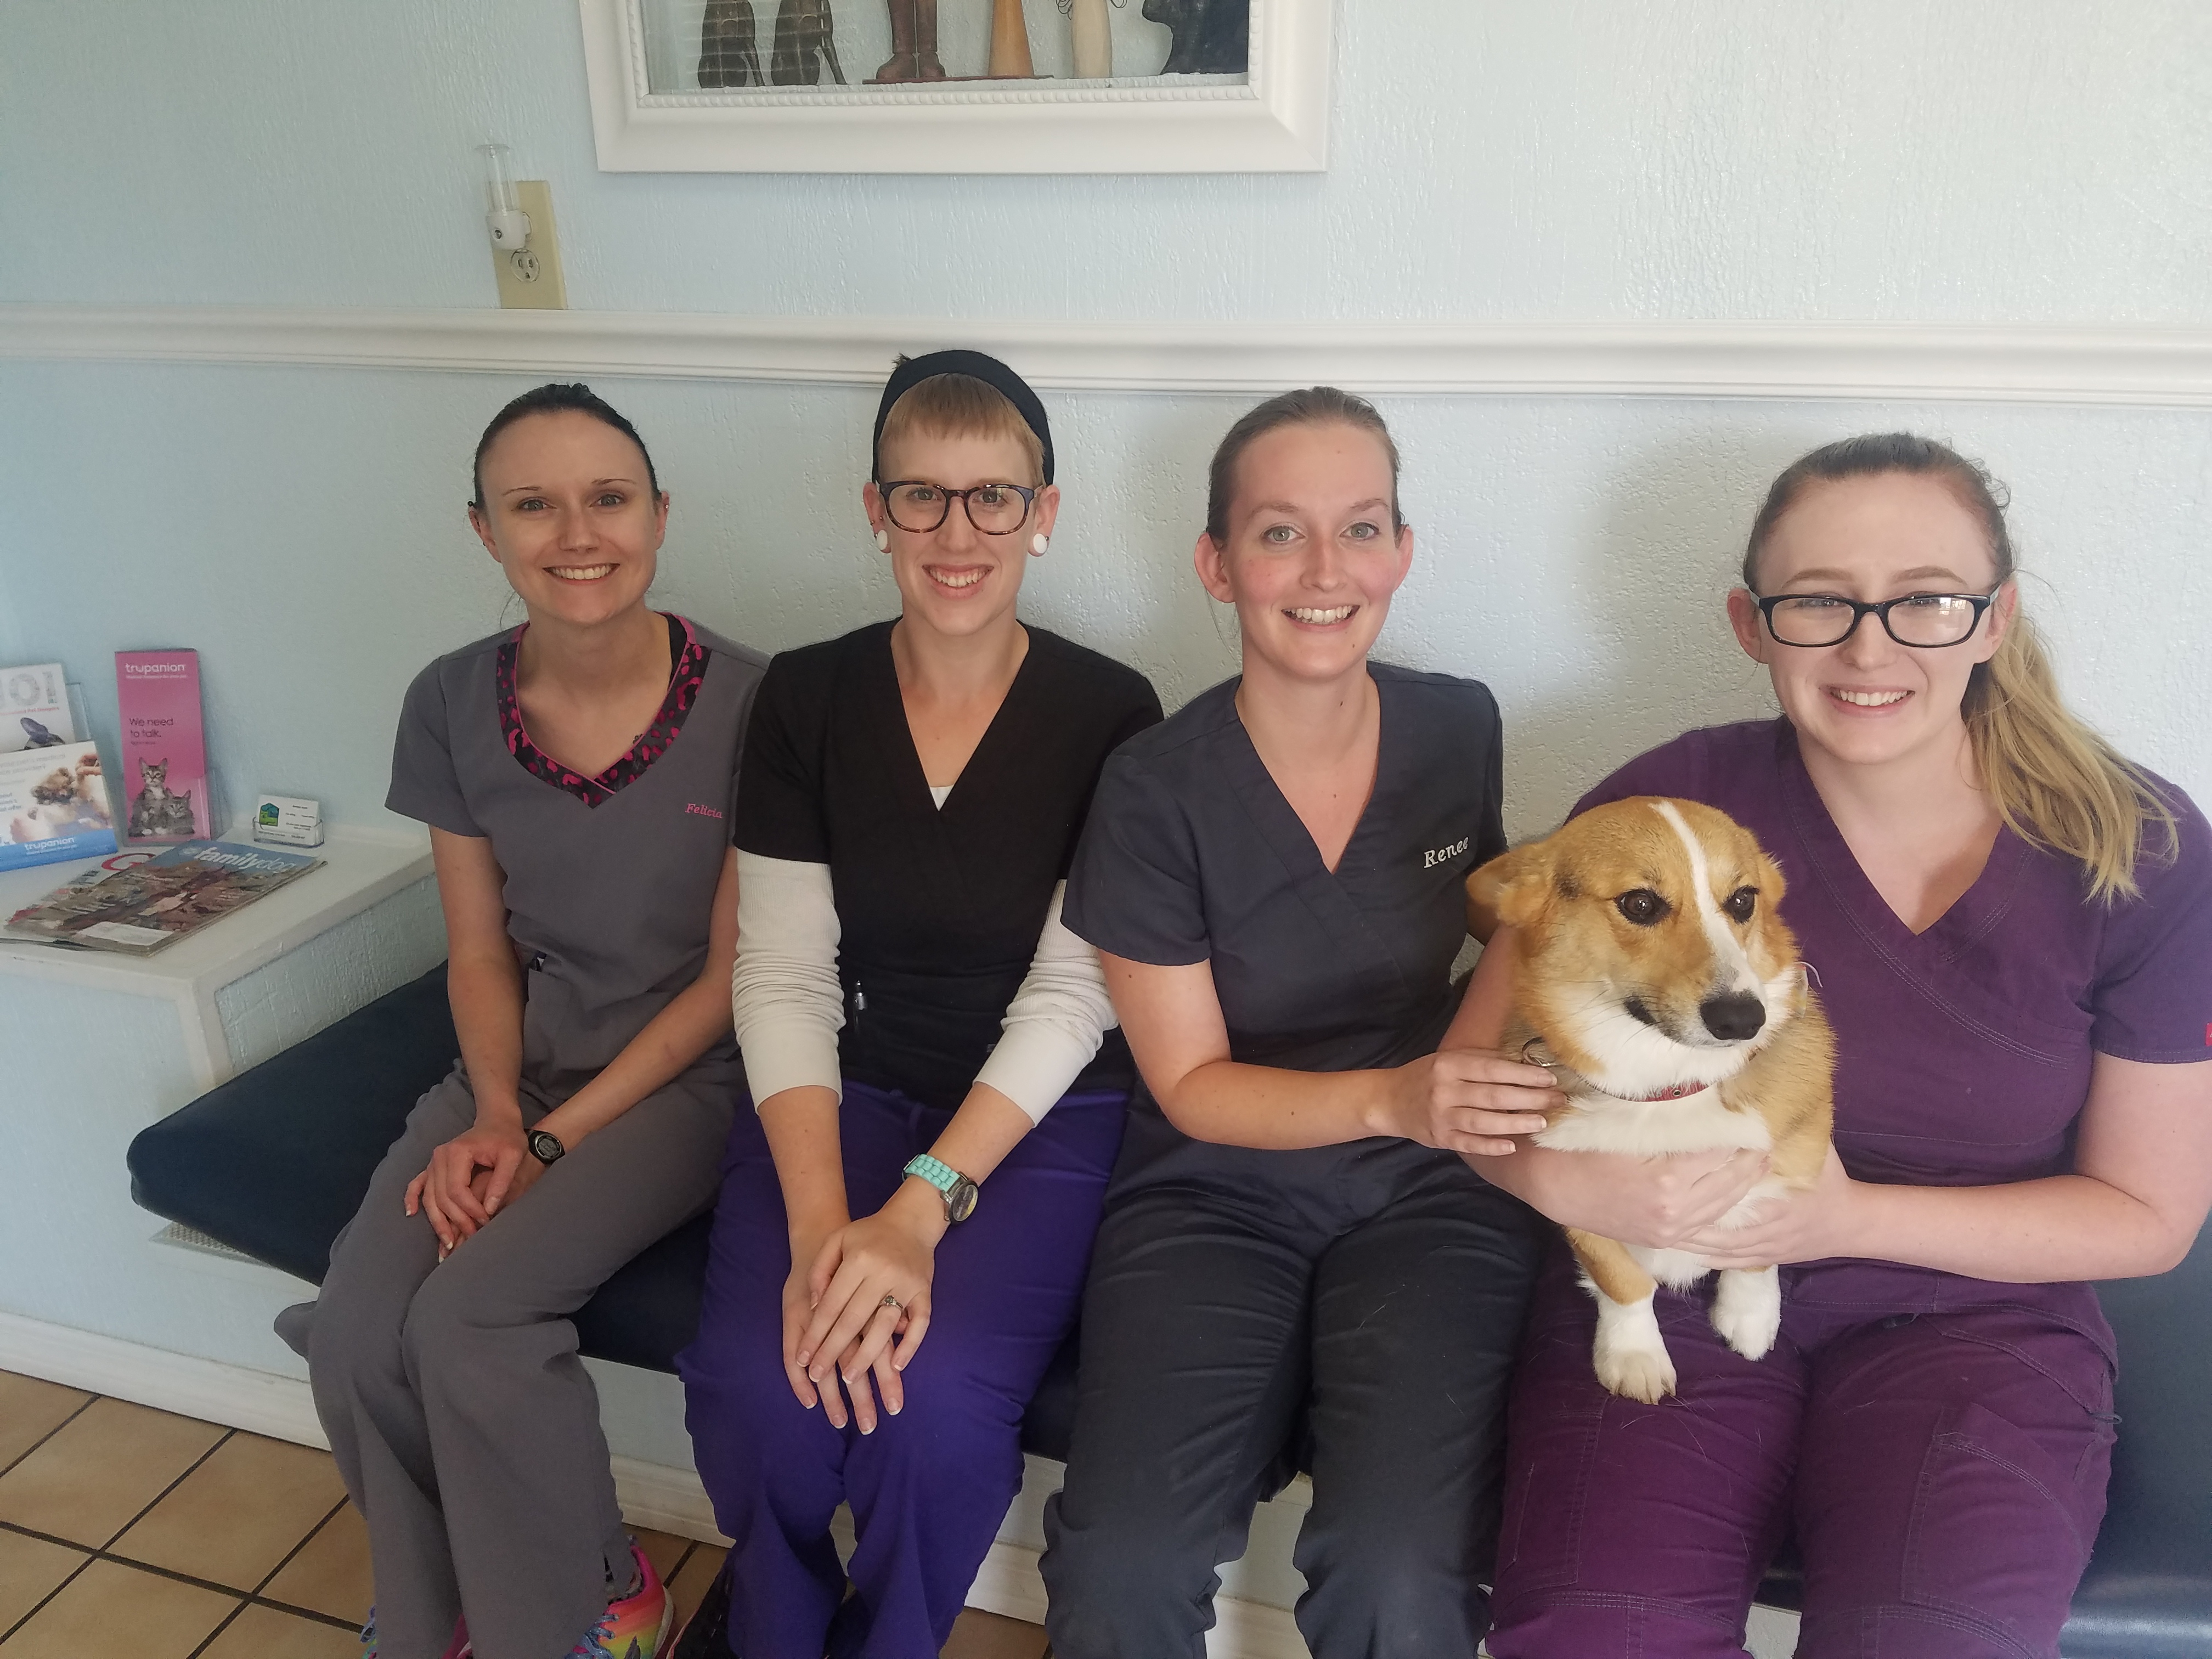 Valued Millennial Members of My Veterinary Clinic Medical Team